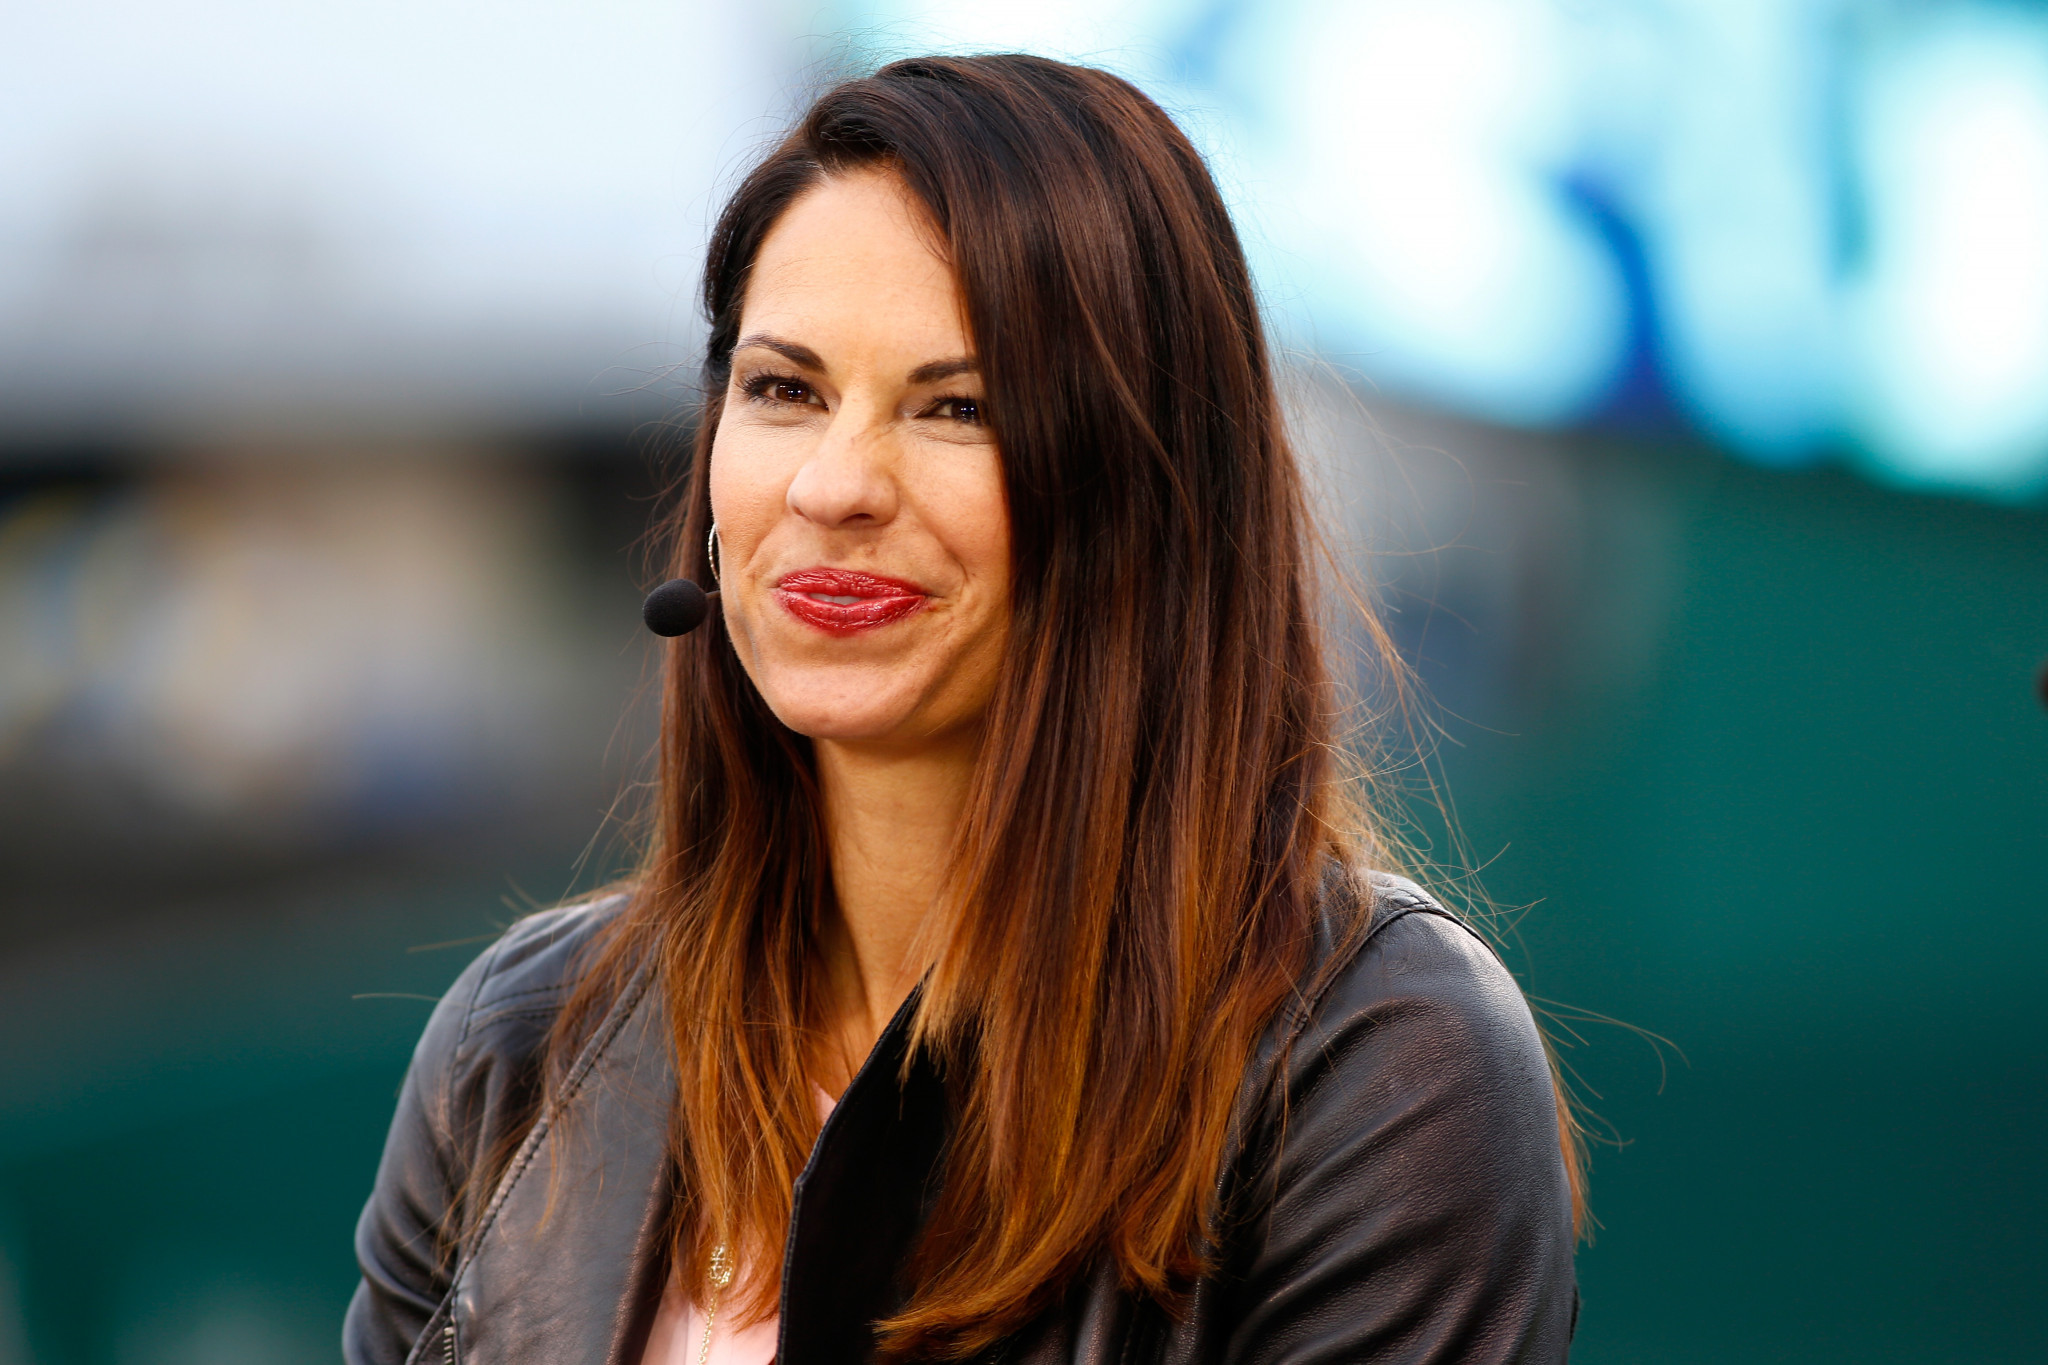 NBC commentator and double Olympic medallist Jessica Mendoza said the day of the softball medal matches was 